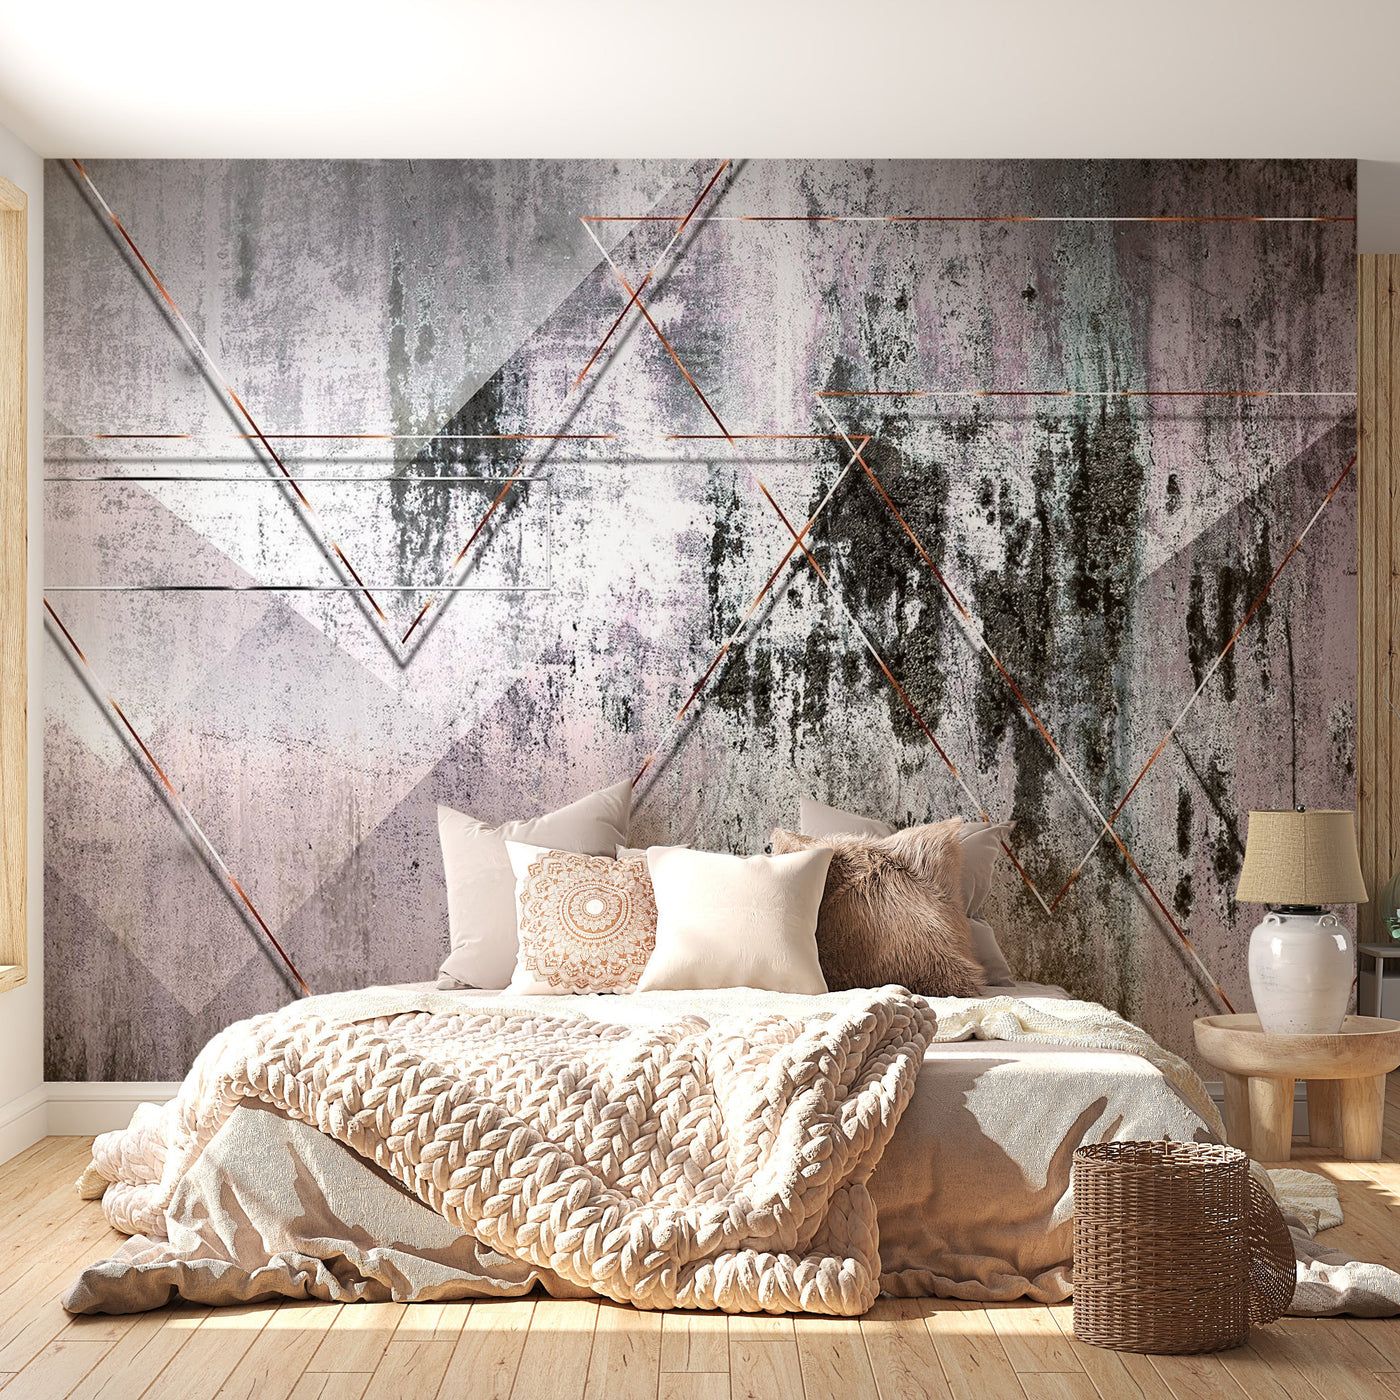 Peel & Stick Wall Mural - Geometric Vintage Concrete Design - Removable Wall Decals